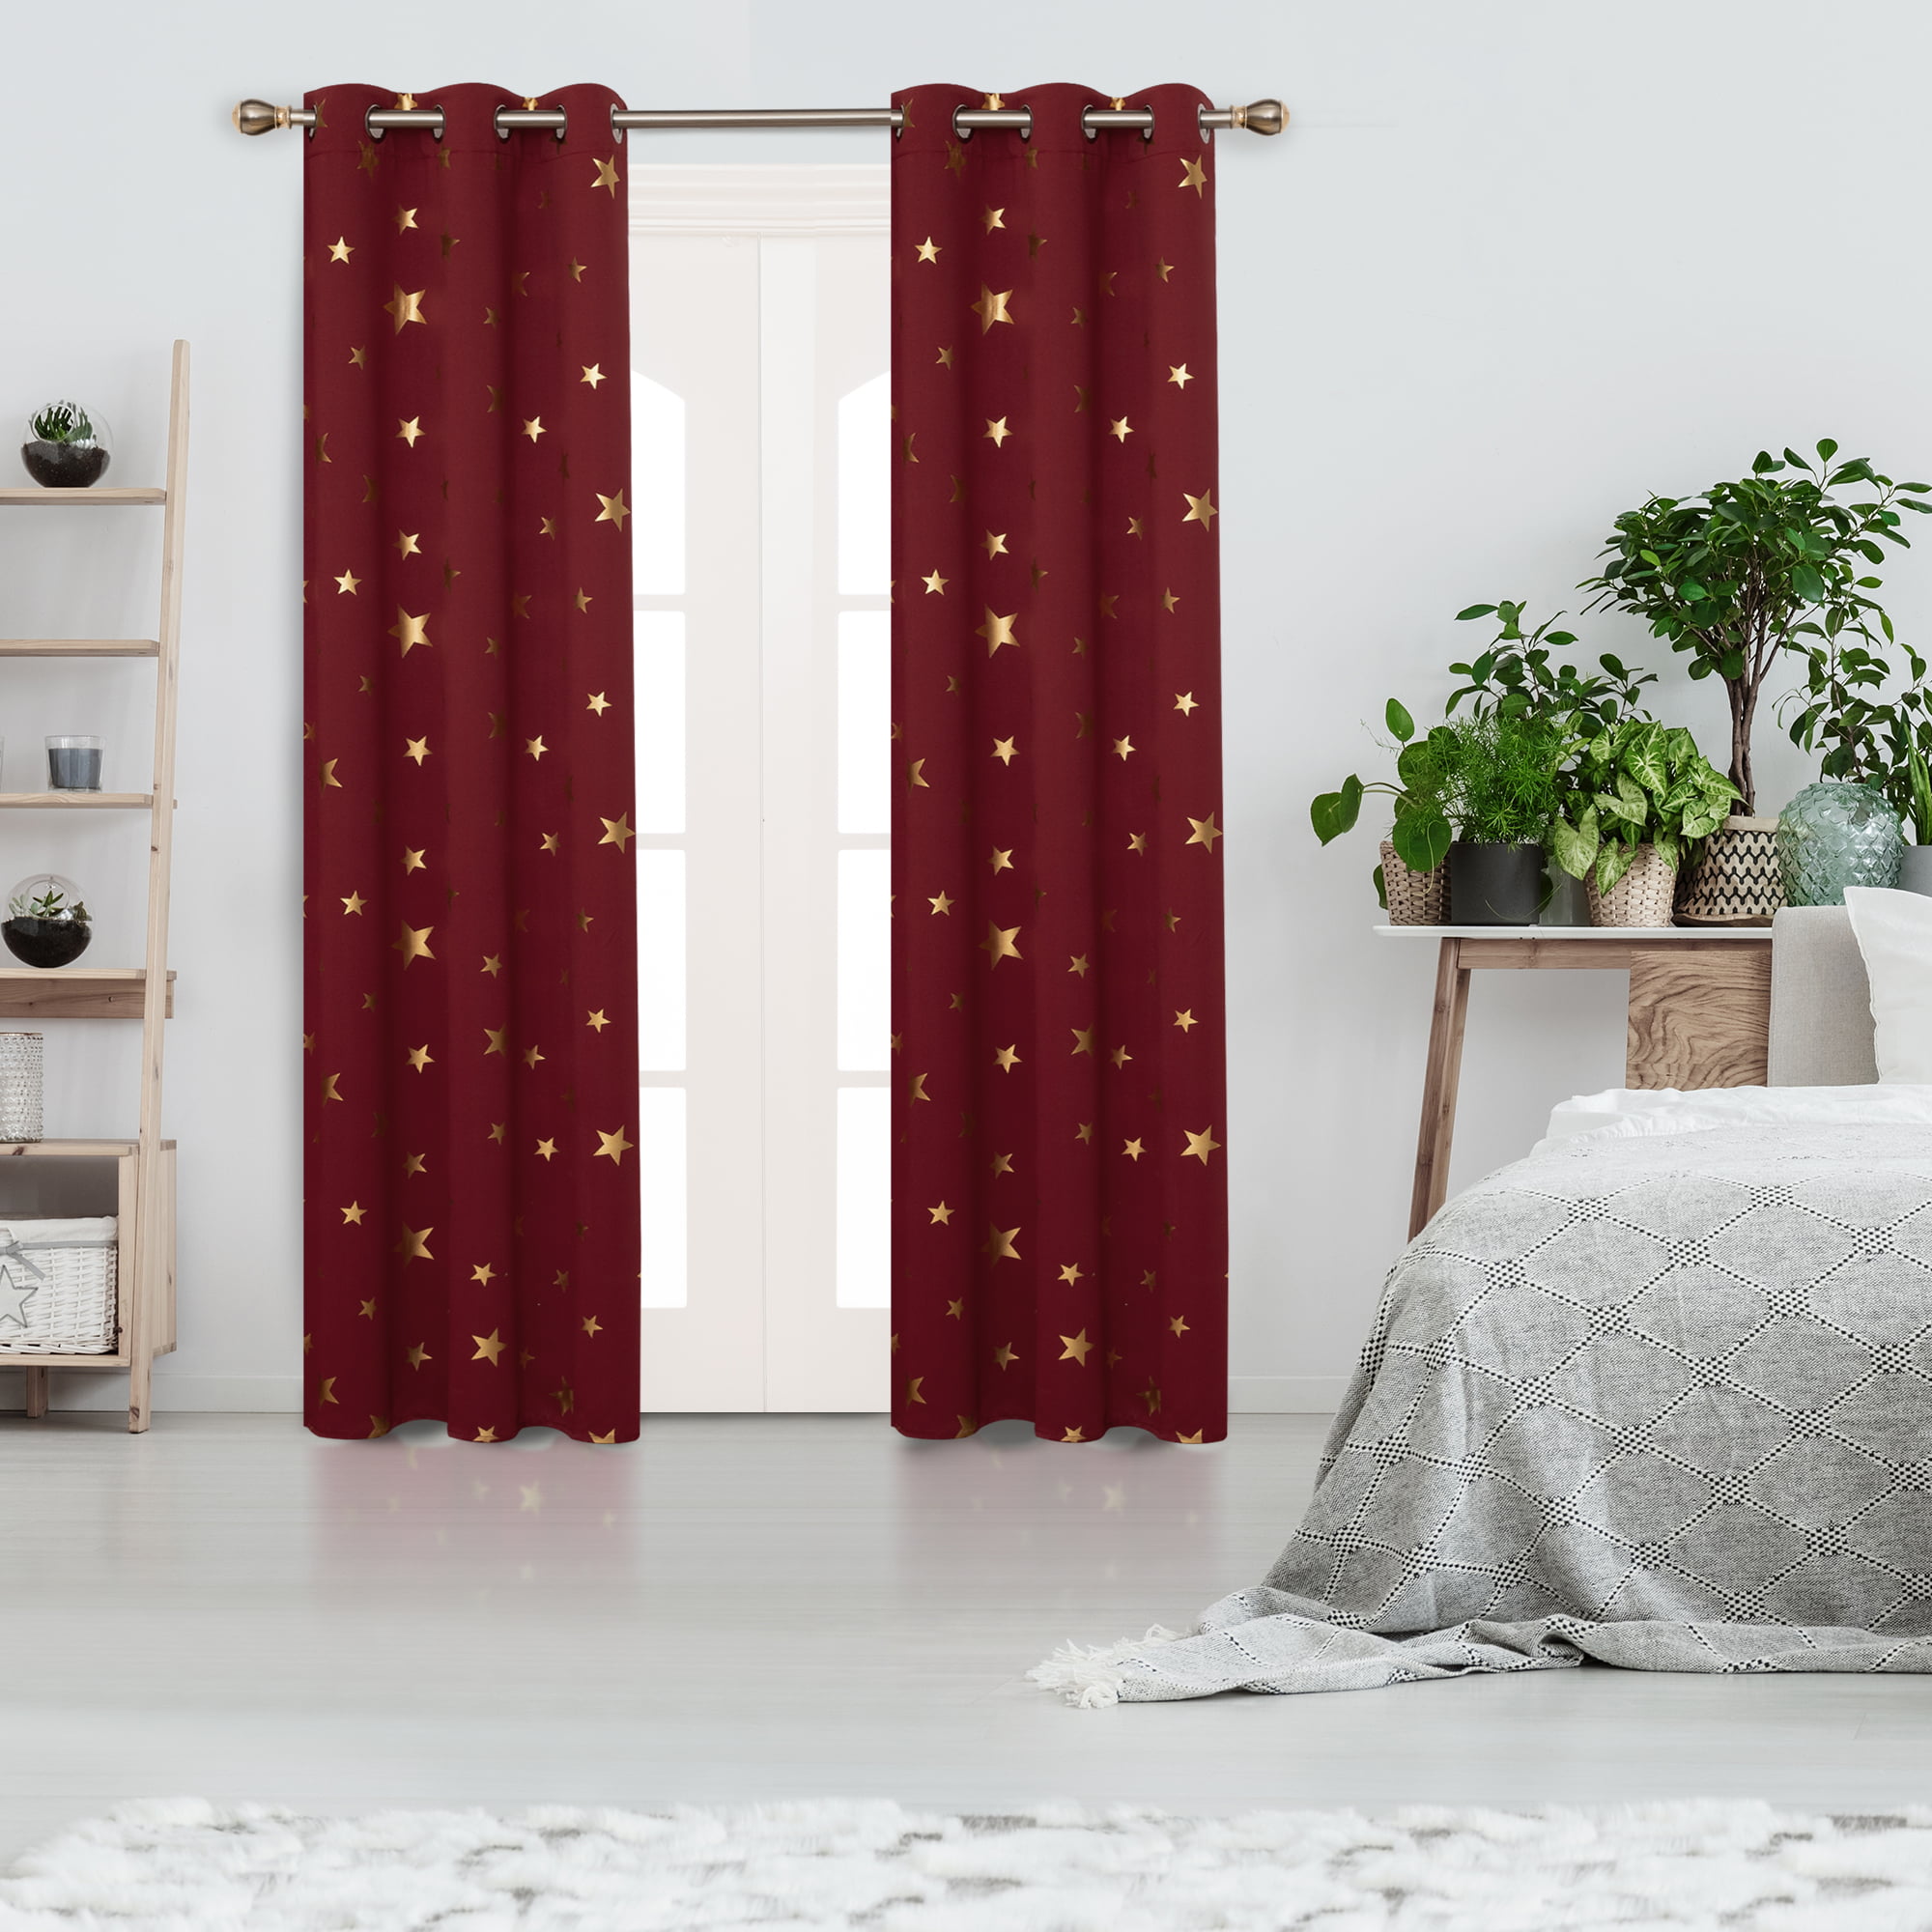 Blackout Curtains 2 Panels for Room Darkening Thermal Insulated Window Burgundy 